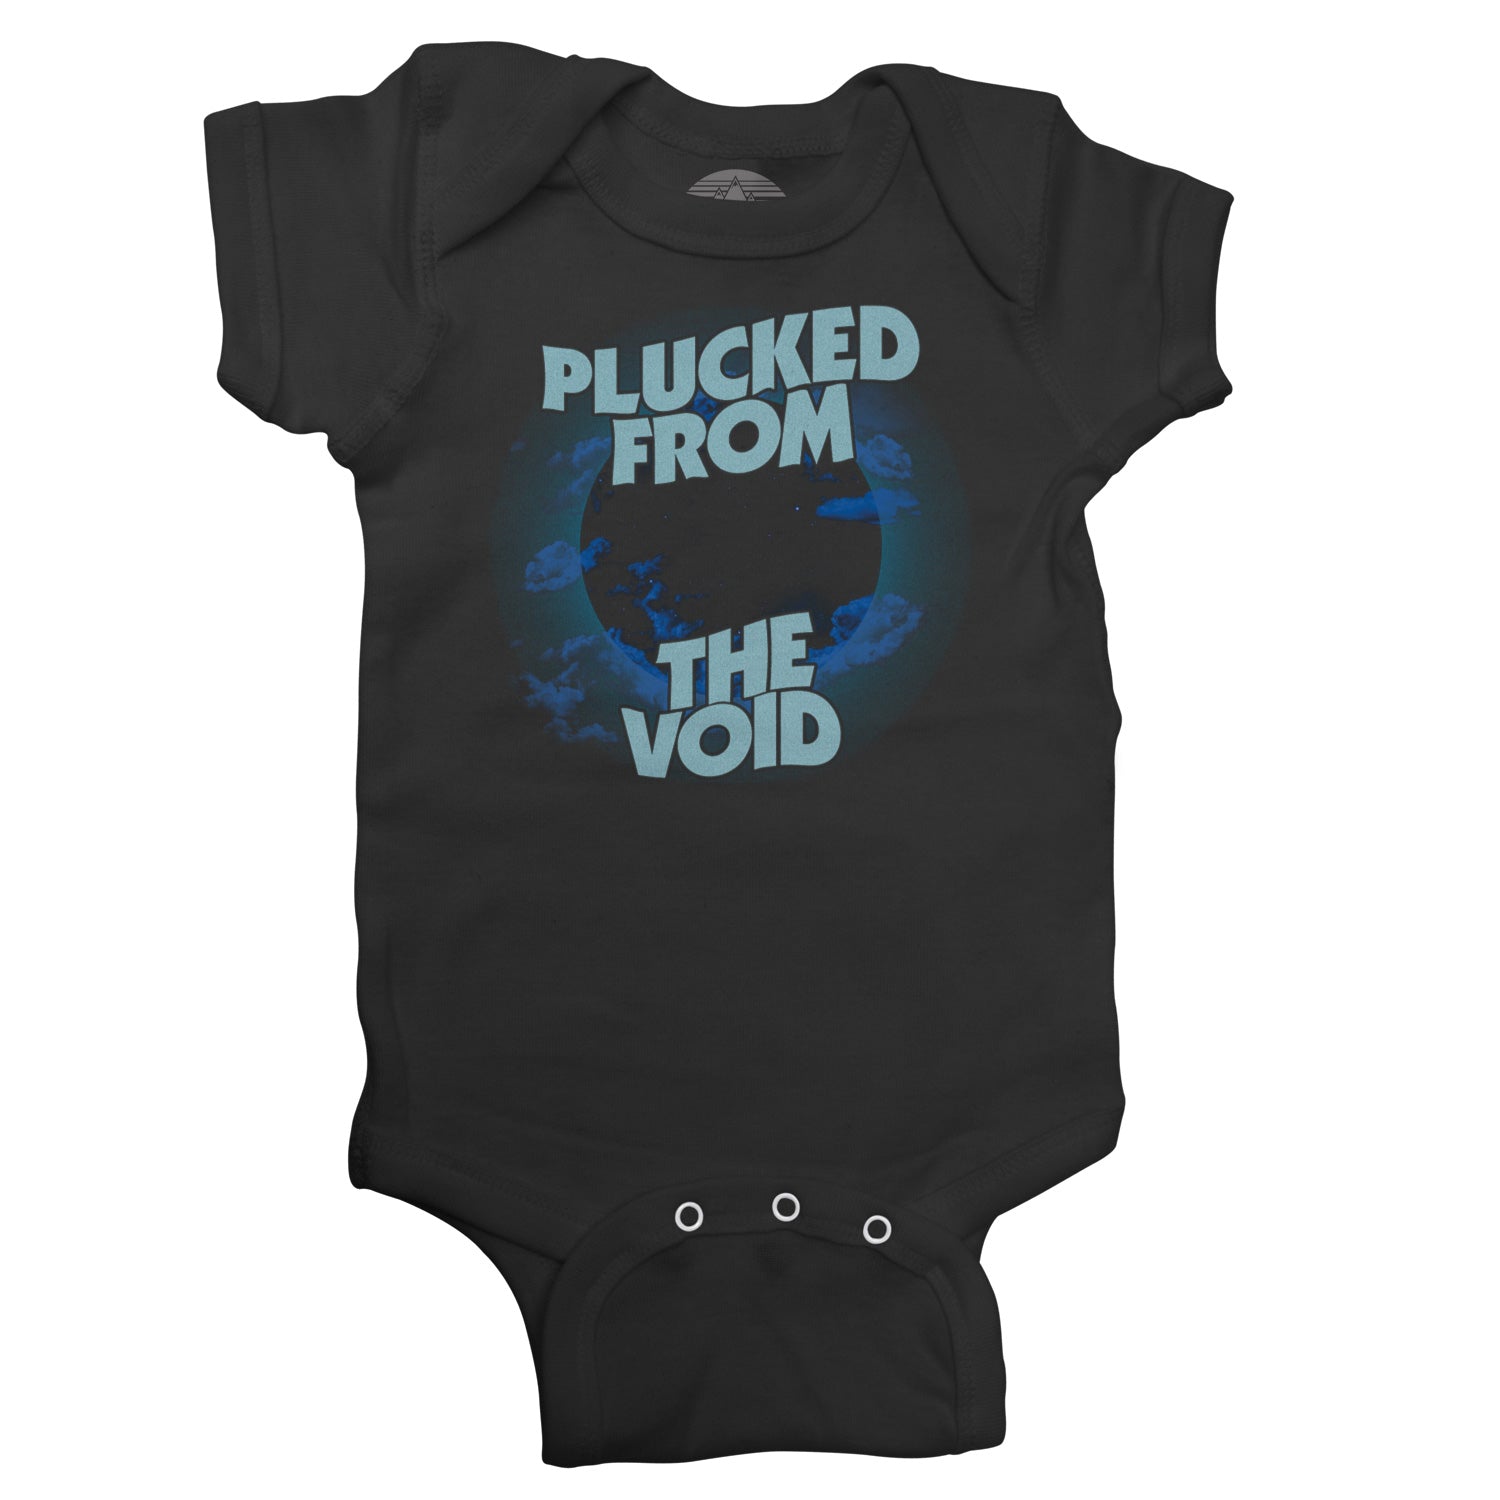 Plucked From the Void Infant Bodysuit - Unisex Fit